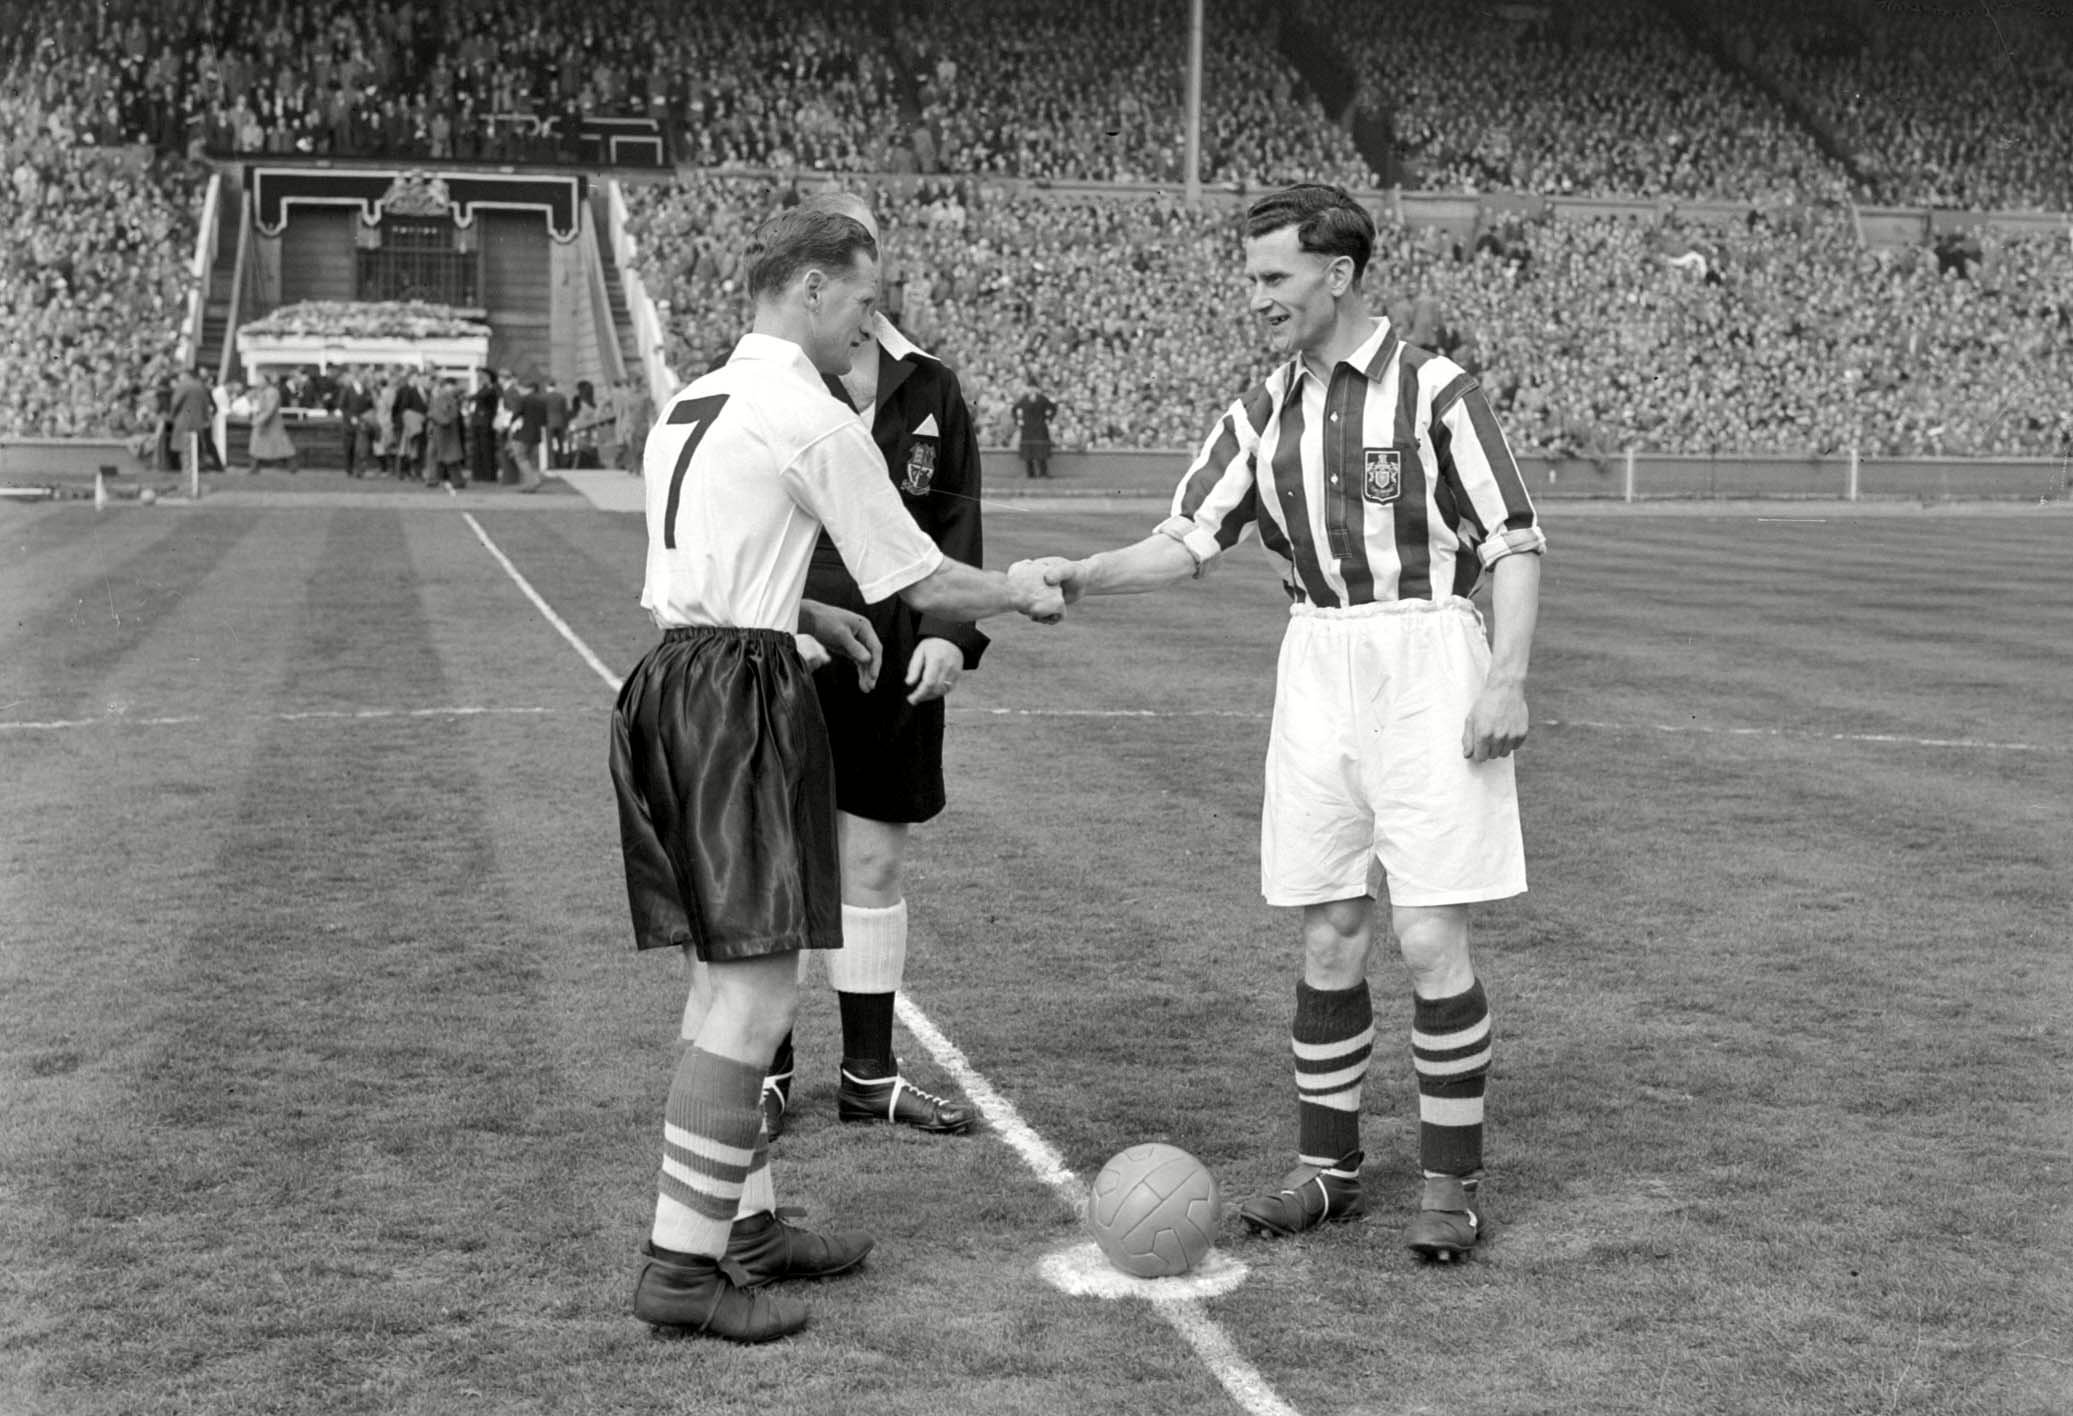 The two 1954 FA Cup final captains shake hands before kick-off